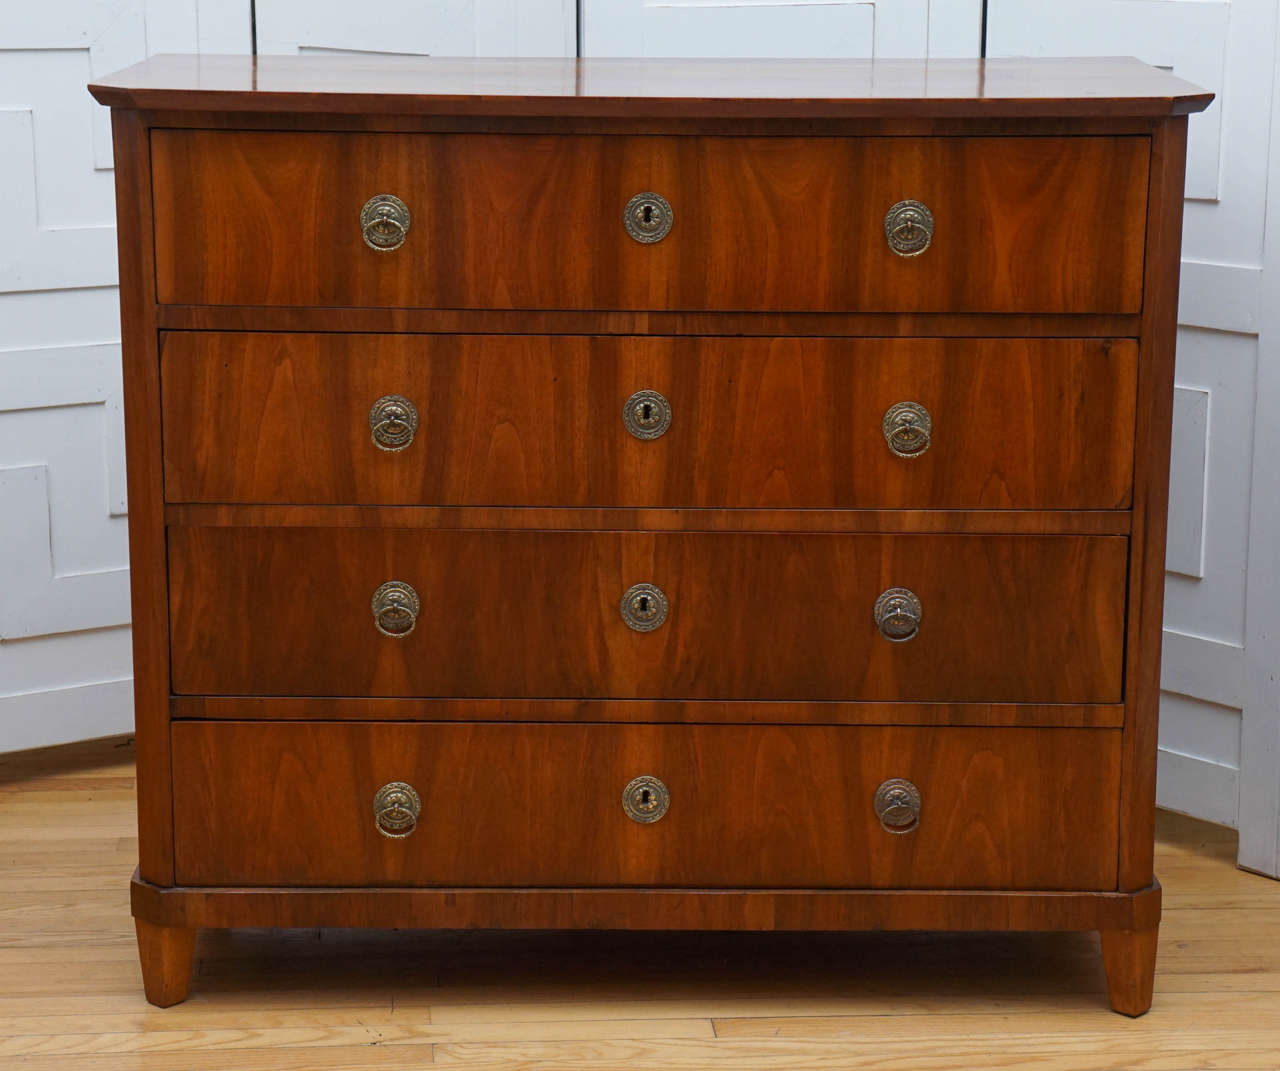 Walnut continental chest with four drawers and brass details.